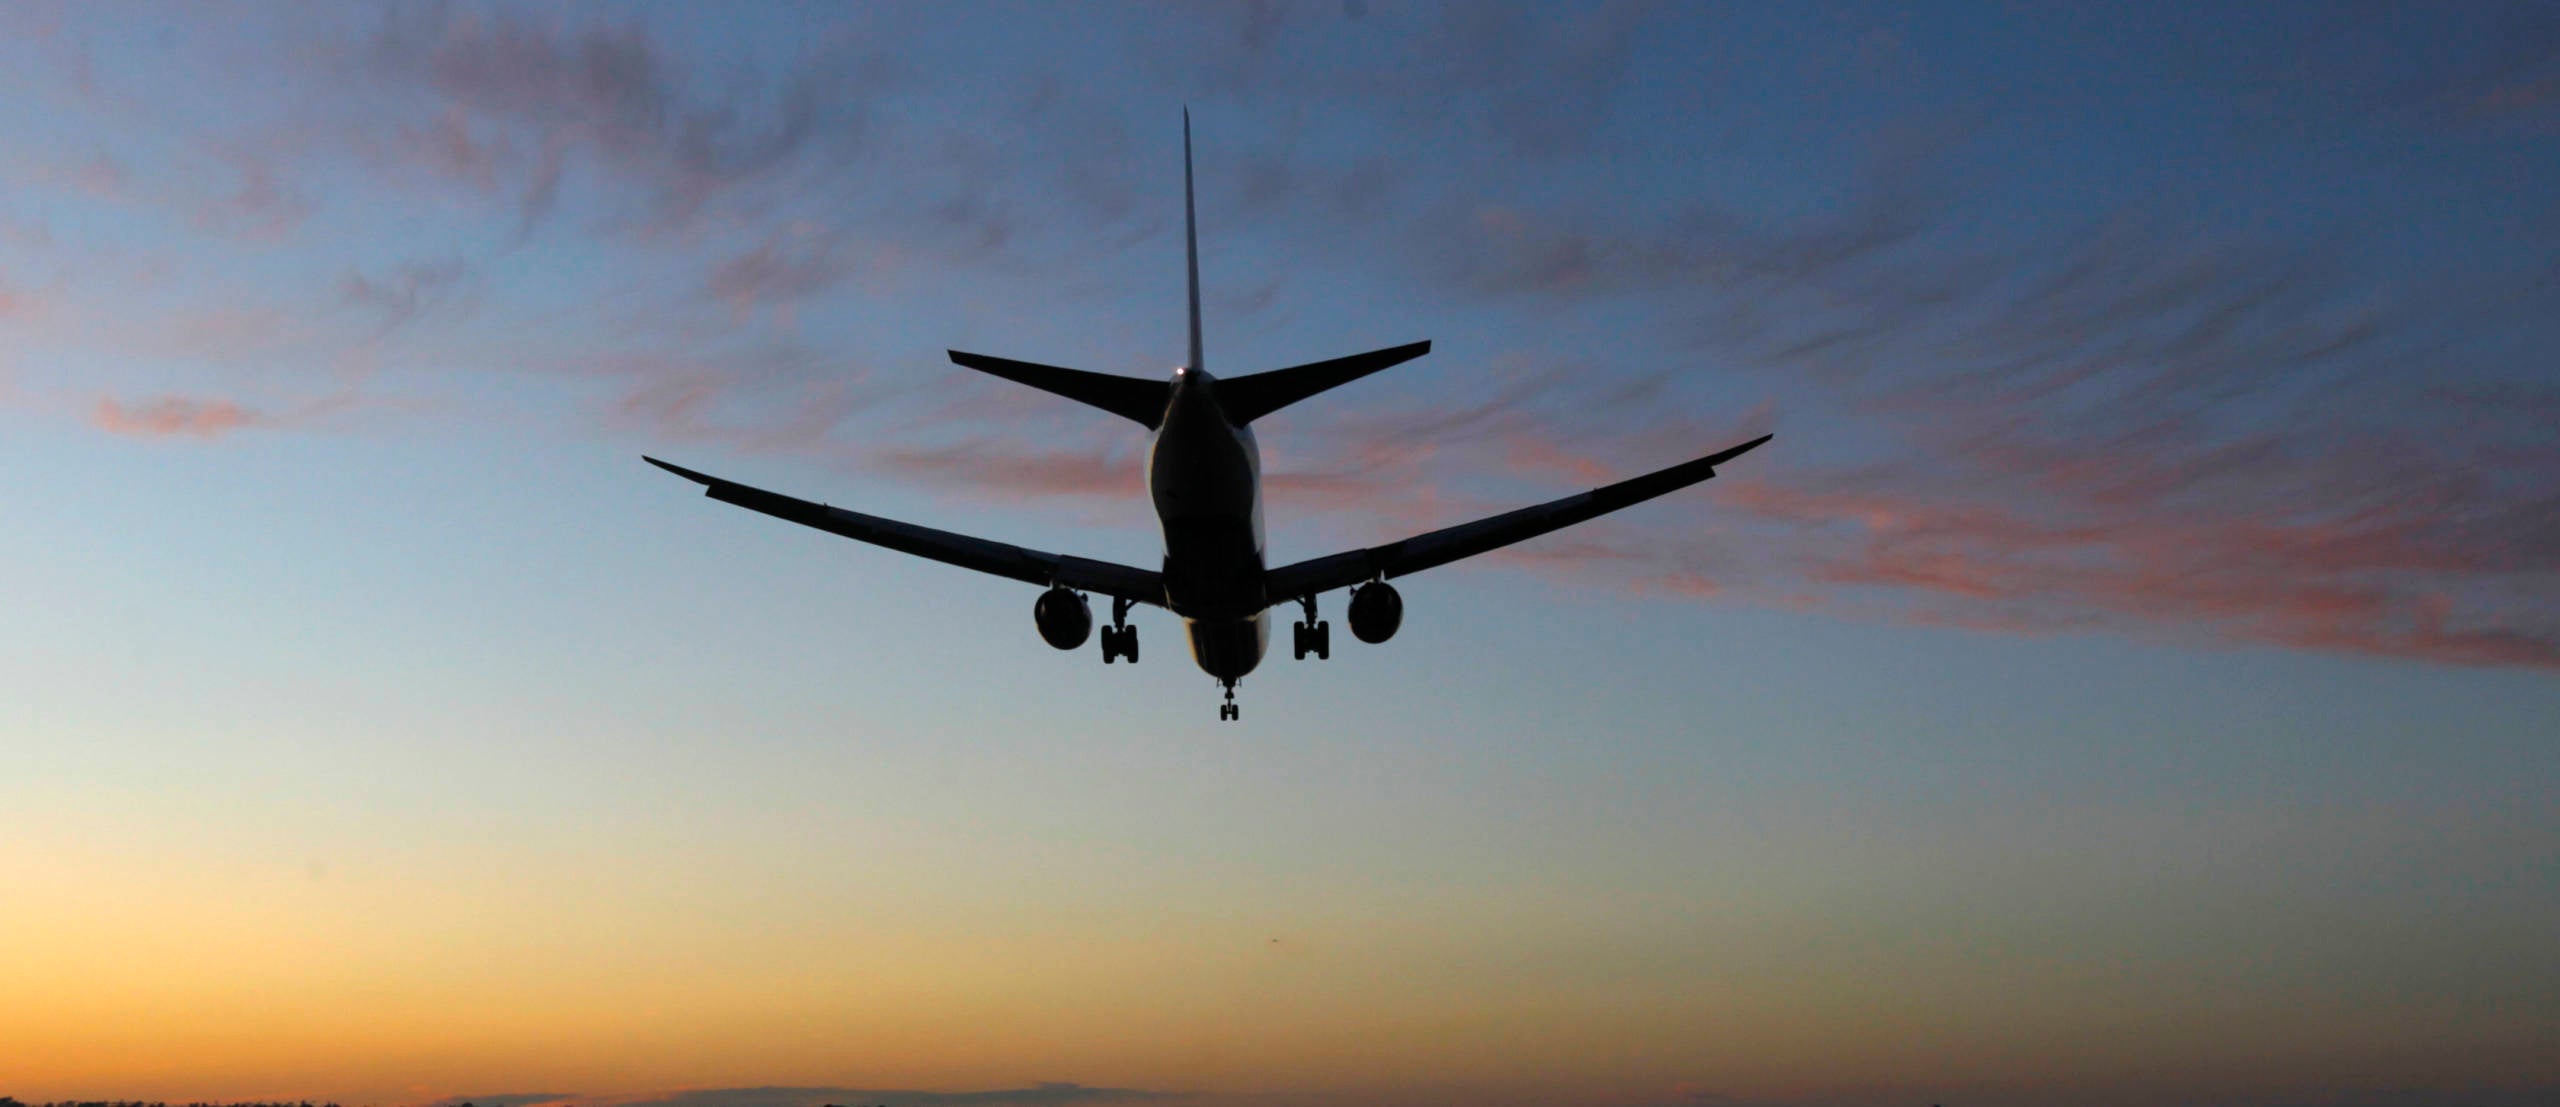 A 787 jet airplane lands at San Diego International Airport at sunset.